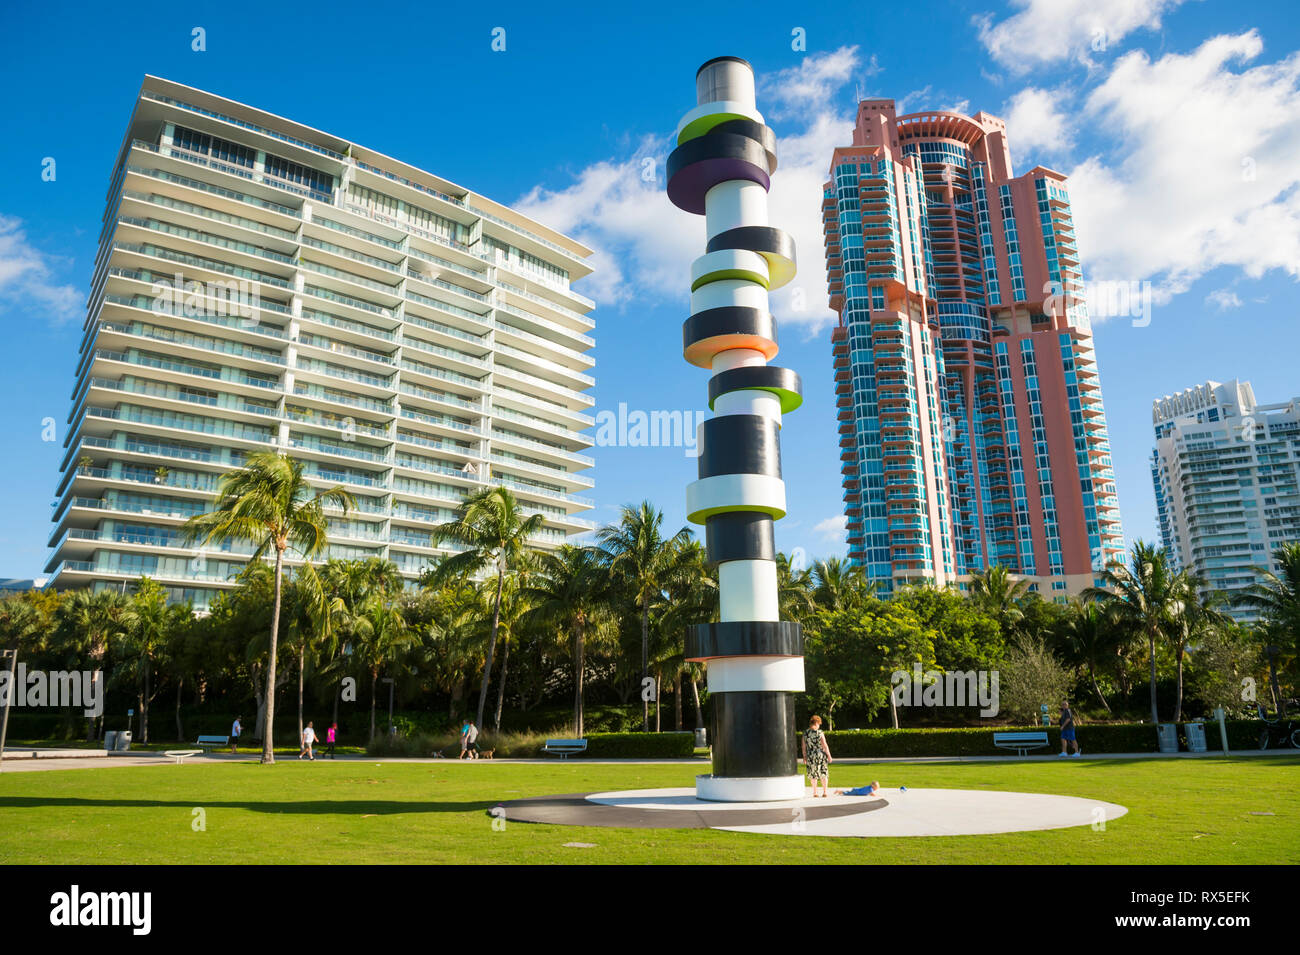 MIAMI - SEPTEMBER, 2018: Obstinate Lighthouse, an installation by German artist Tobias Rehberger, stands amidst the condo towers at South Pointe Park. Stock Photo